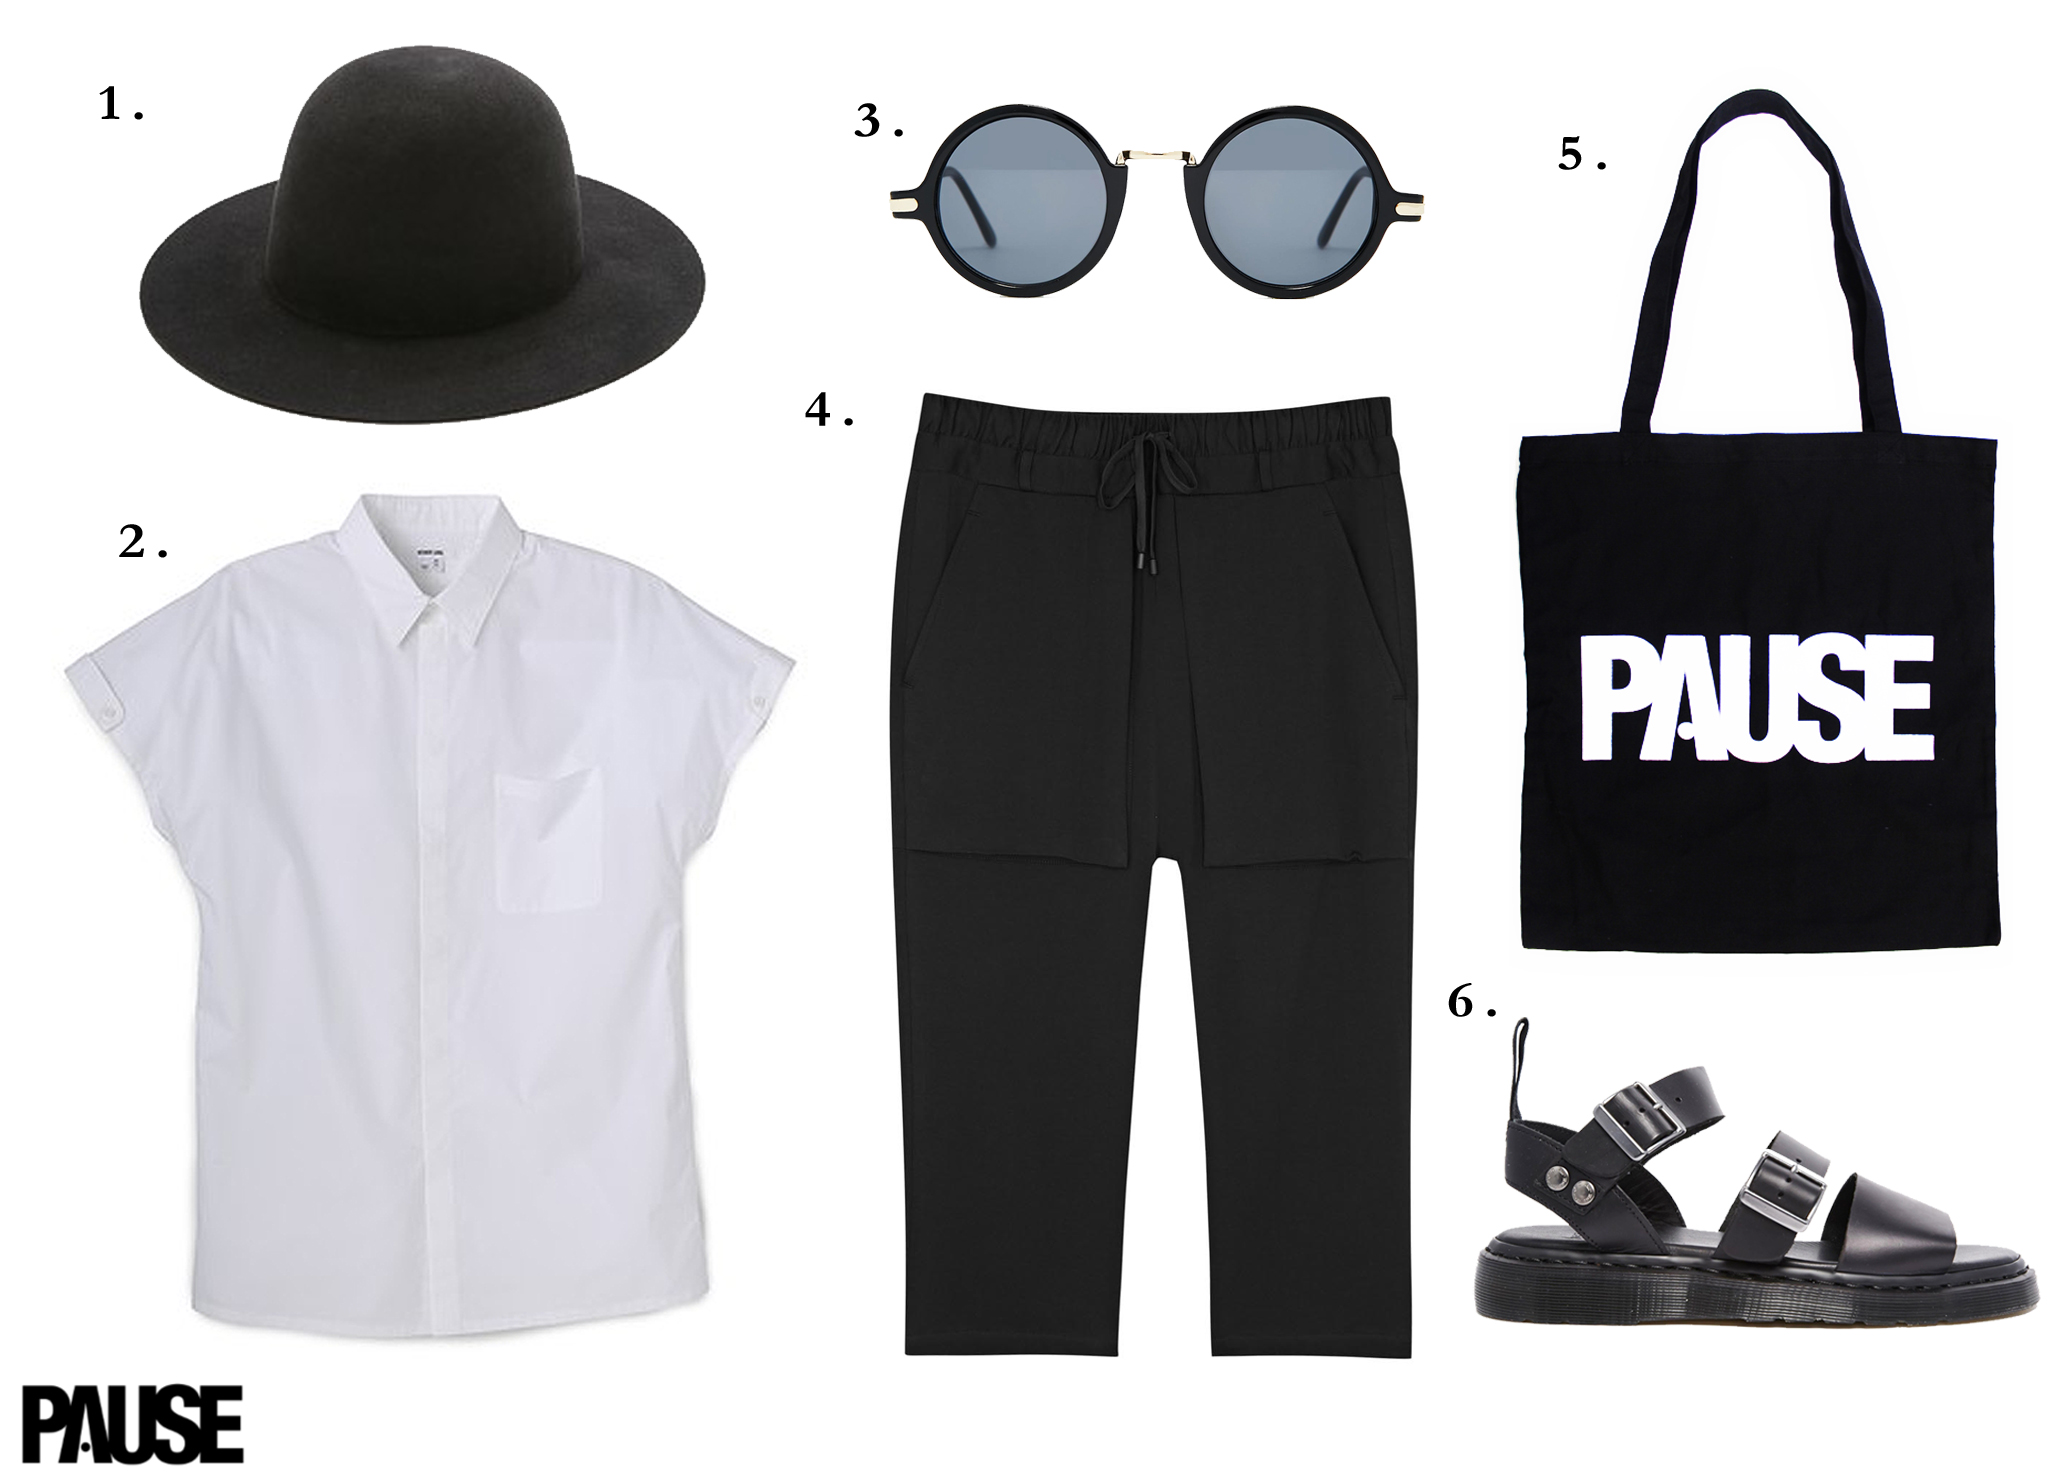 PAUSE Outfit Of The Week: Minimal